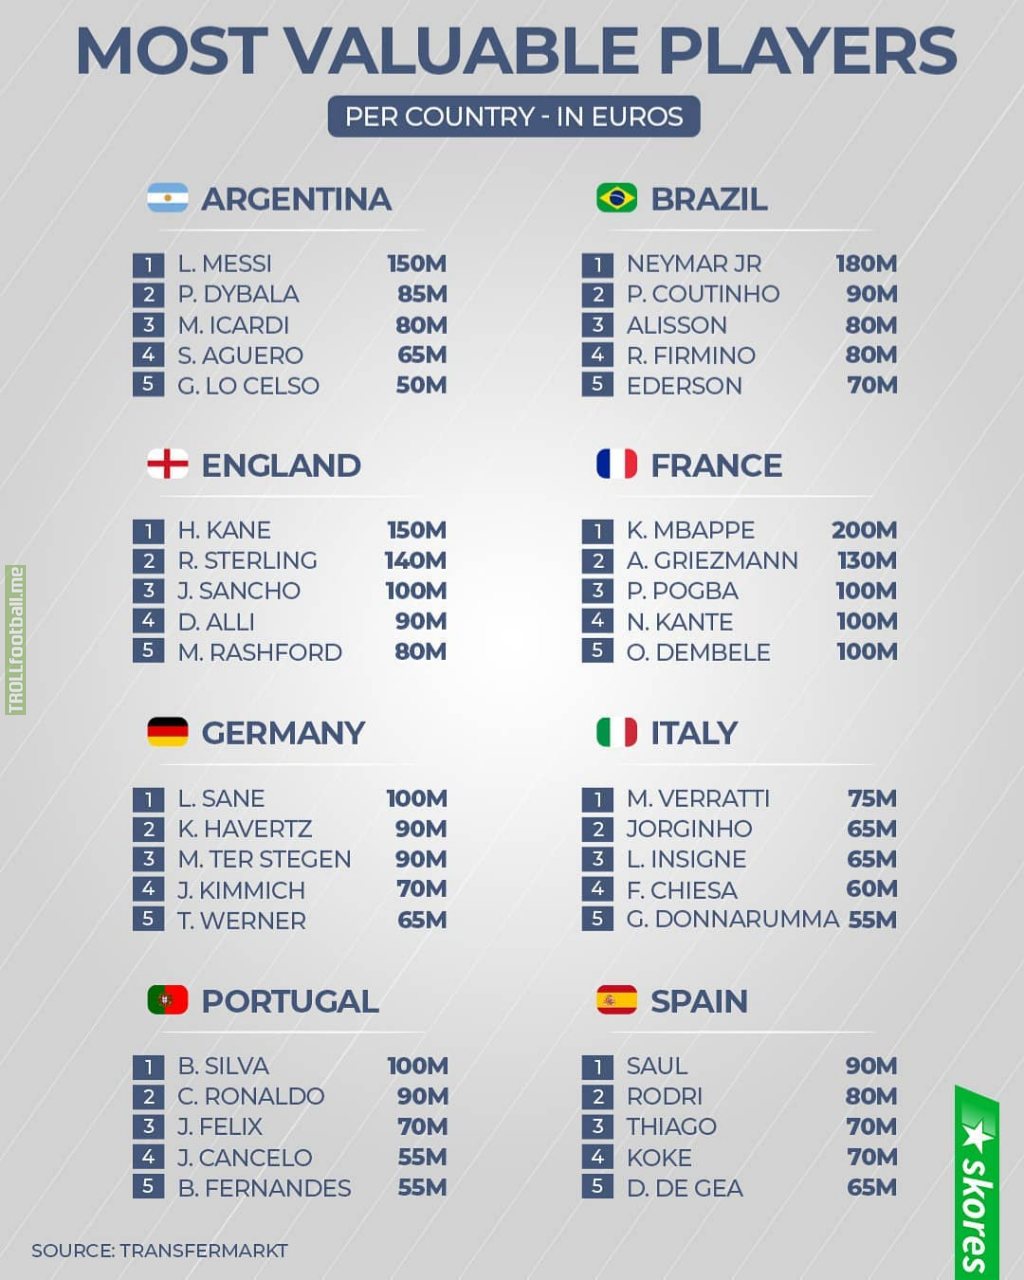 Top 5 most valuable players per country